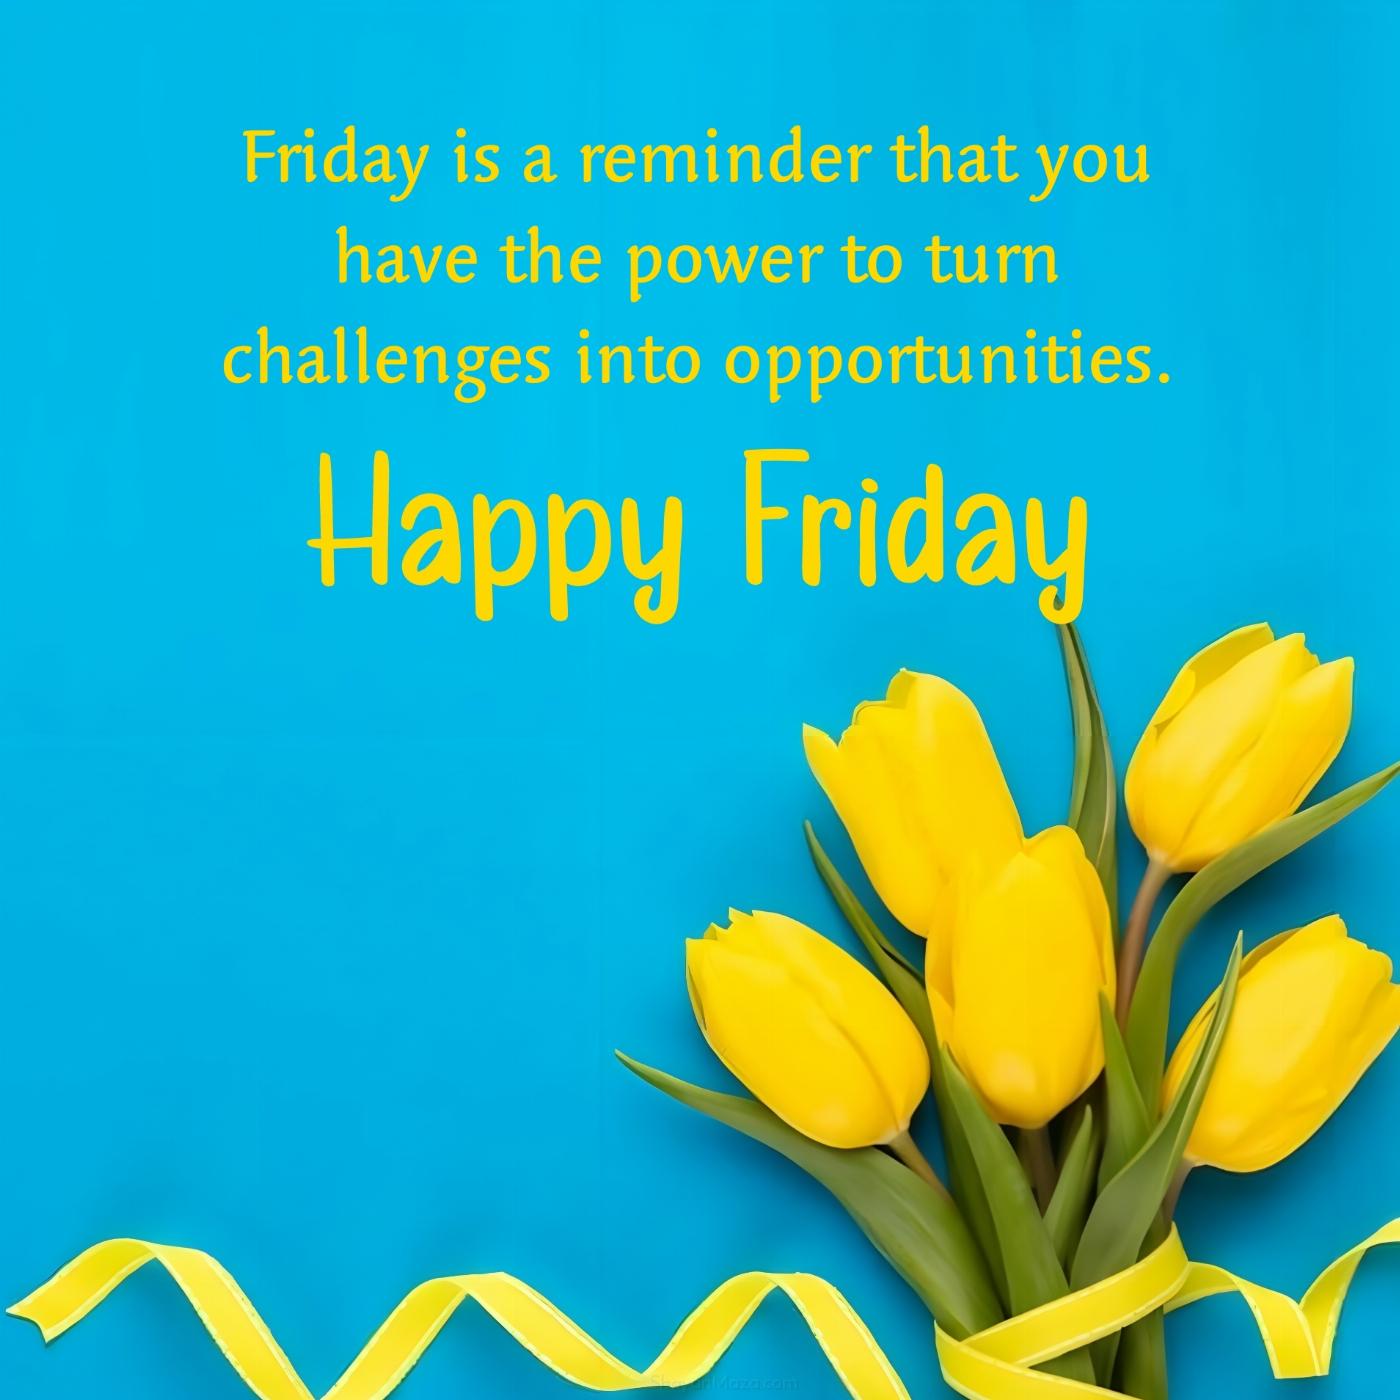 Friday is a reminder that you have the power to turn challenges into opportunities